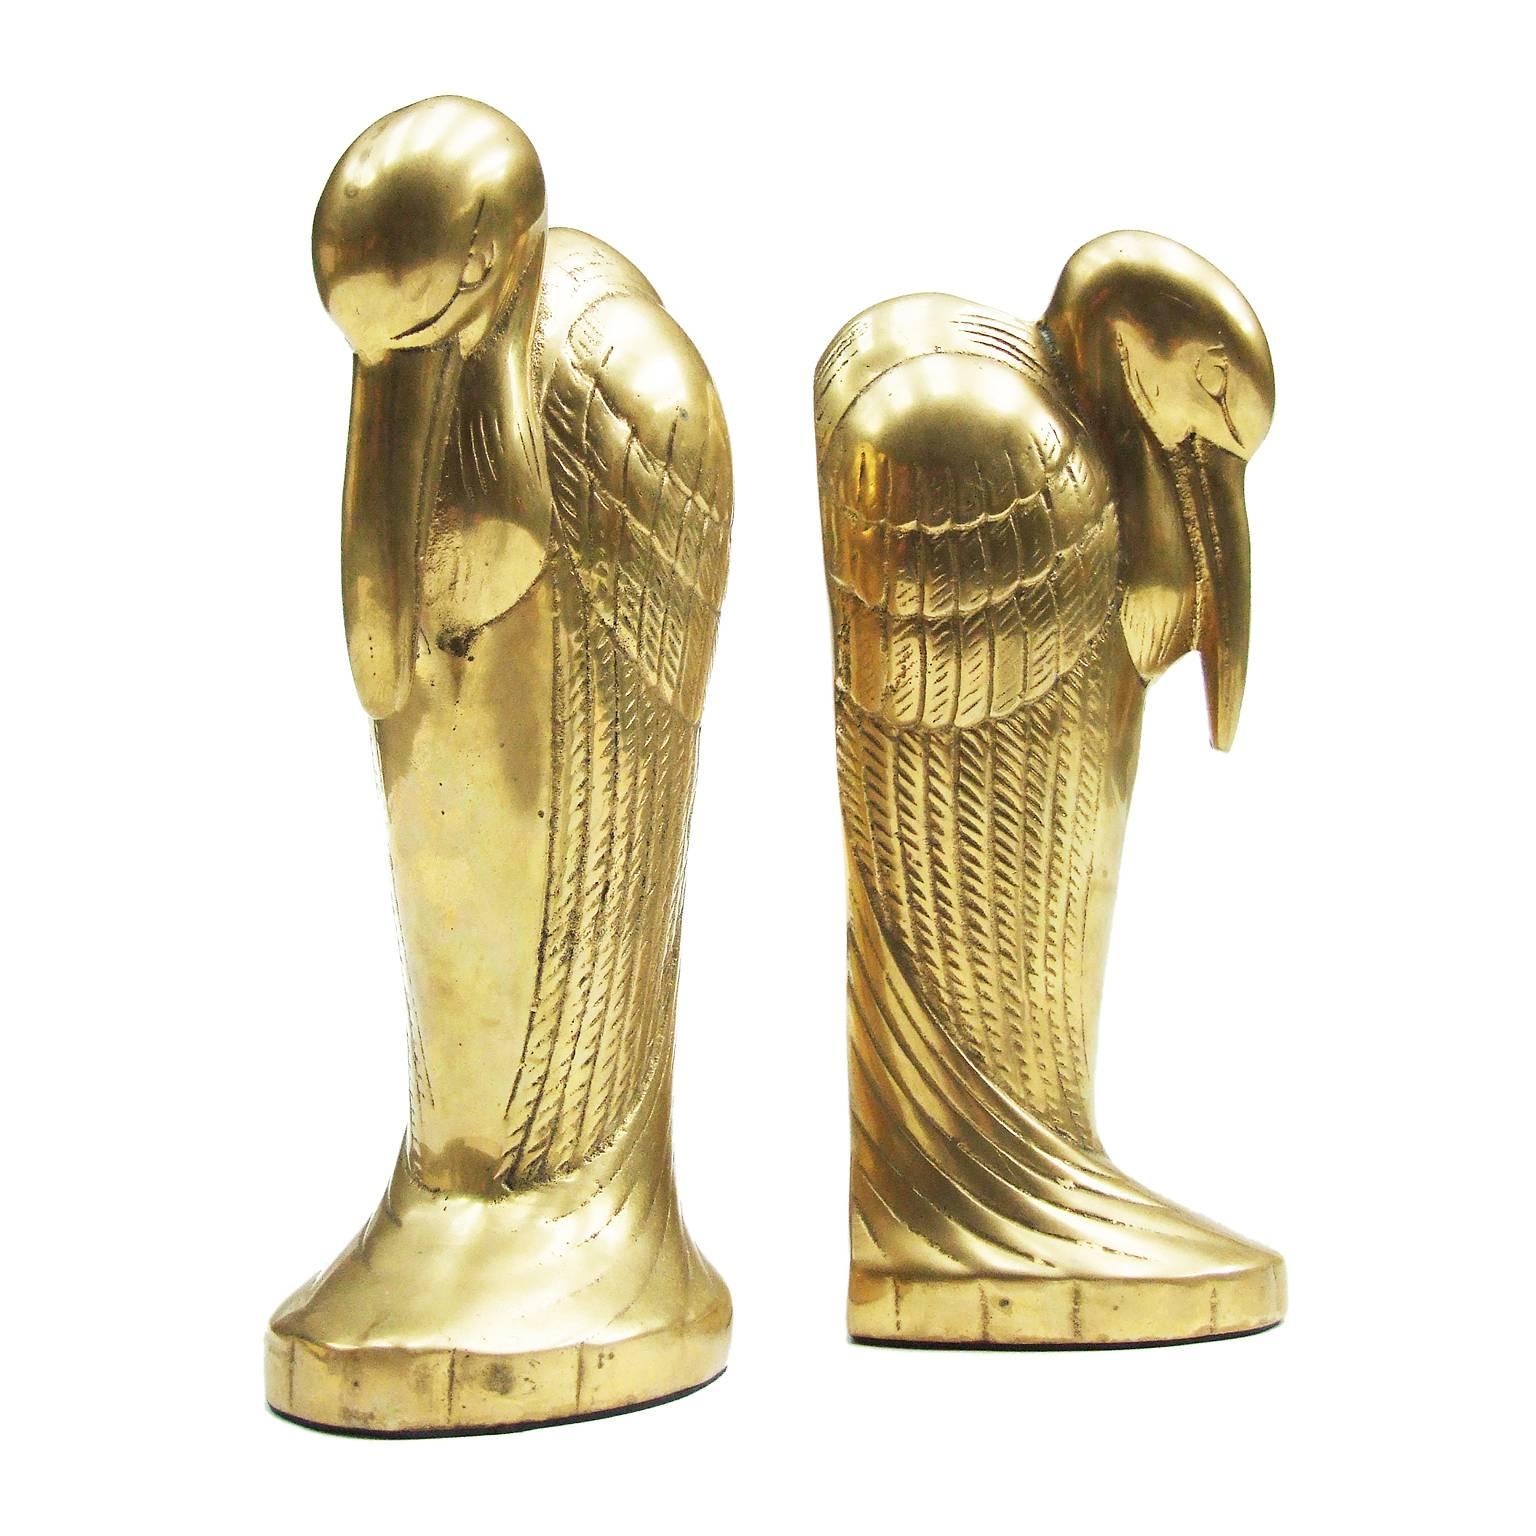 Pair of large 1930s Art Deco bookends designed and manufactured in France.

Solid brass pelican design.

Measures: H 26 cm x L 10 cm x W 7 cm.